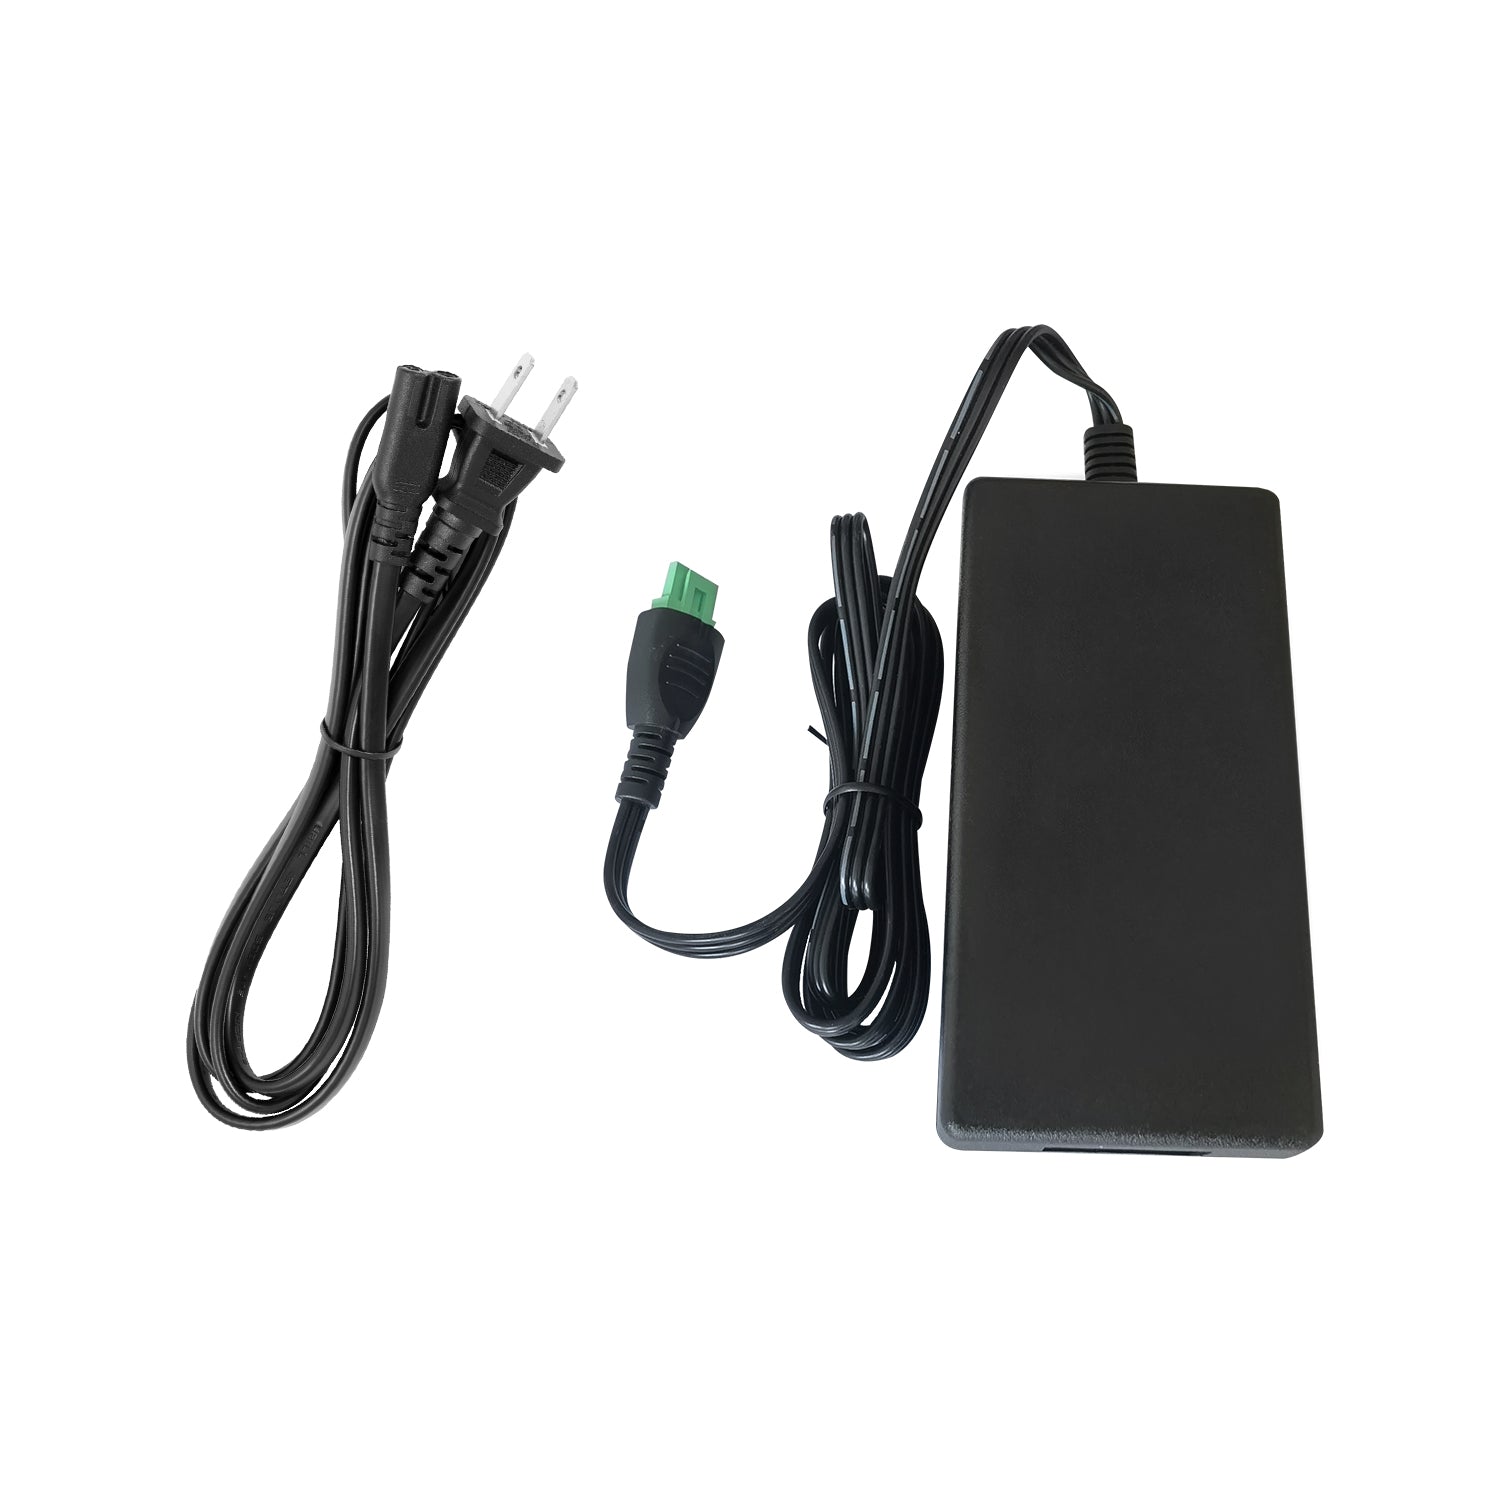 Power Adapter for HP 0957-2304 Printer.